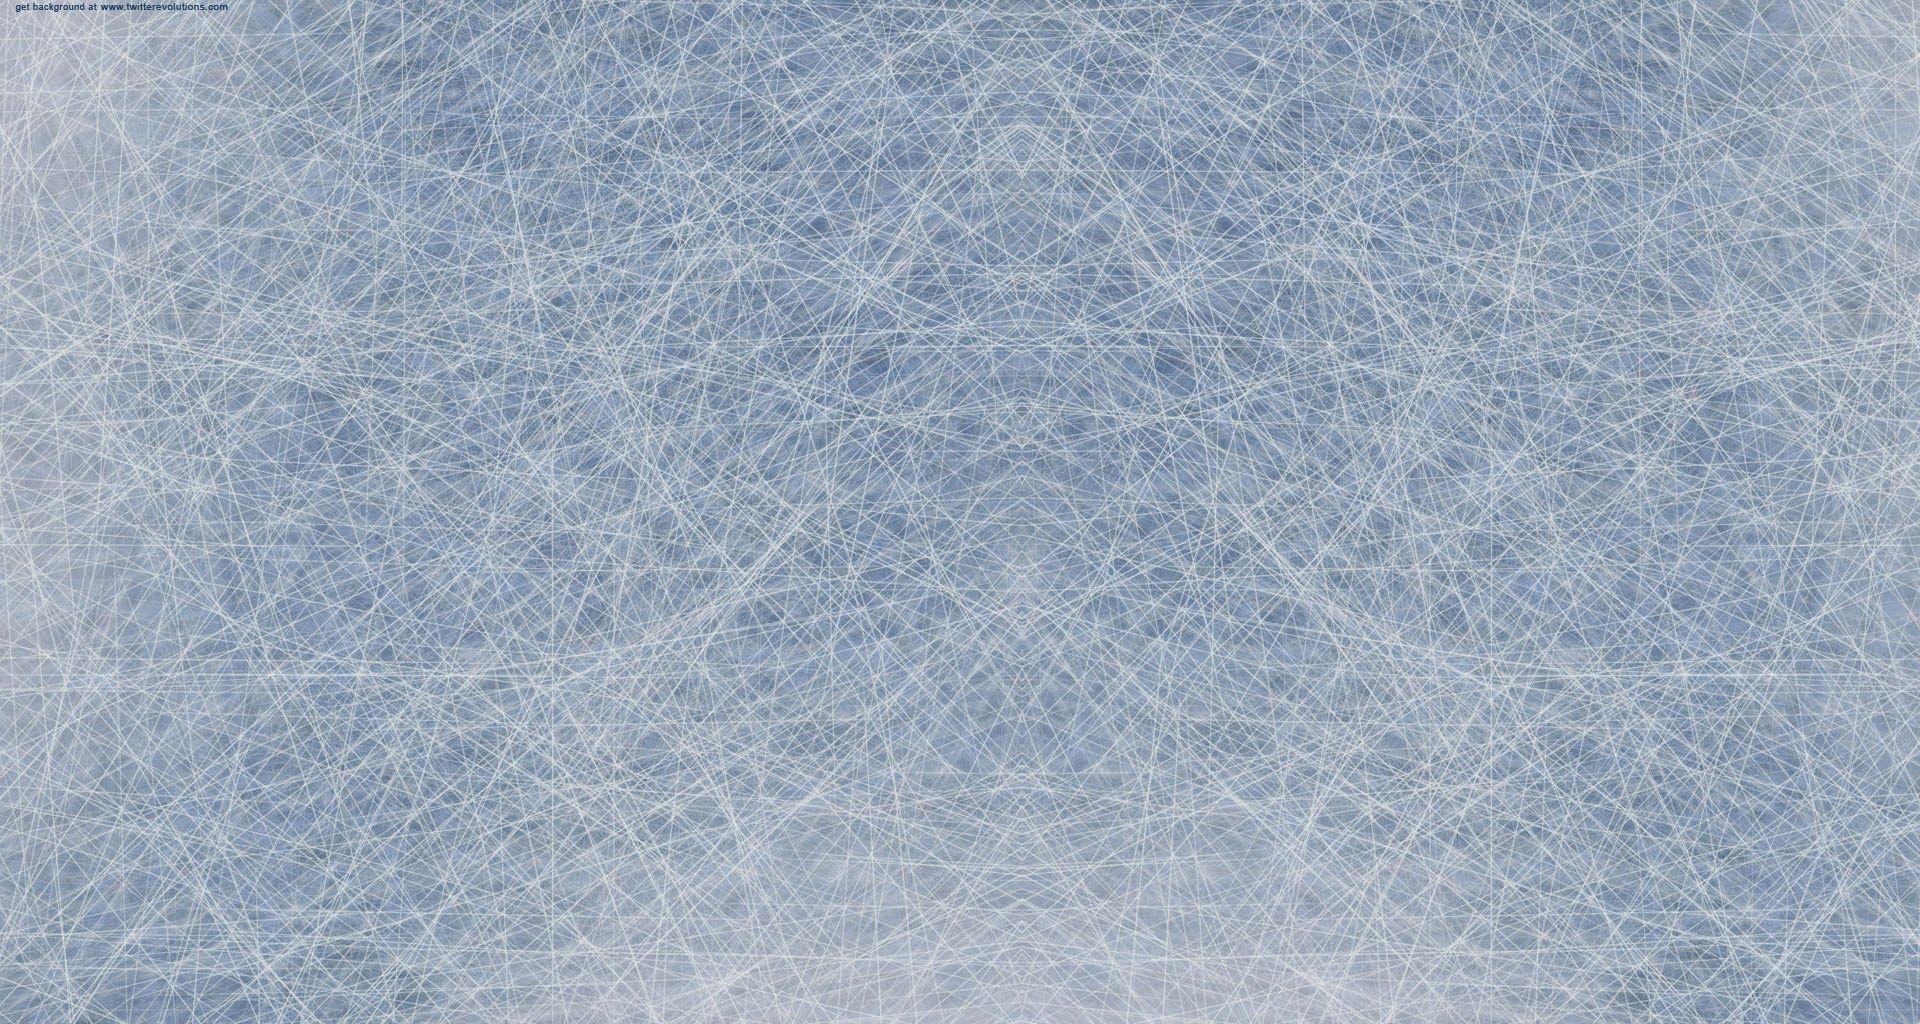 Gallery For > Ice Hockey Background